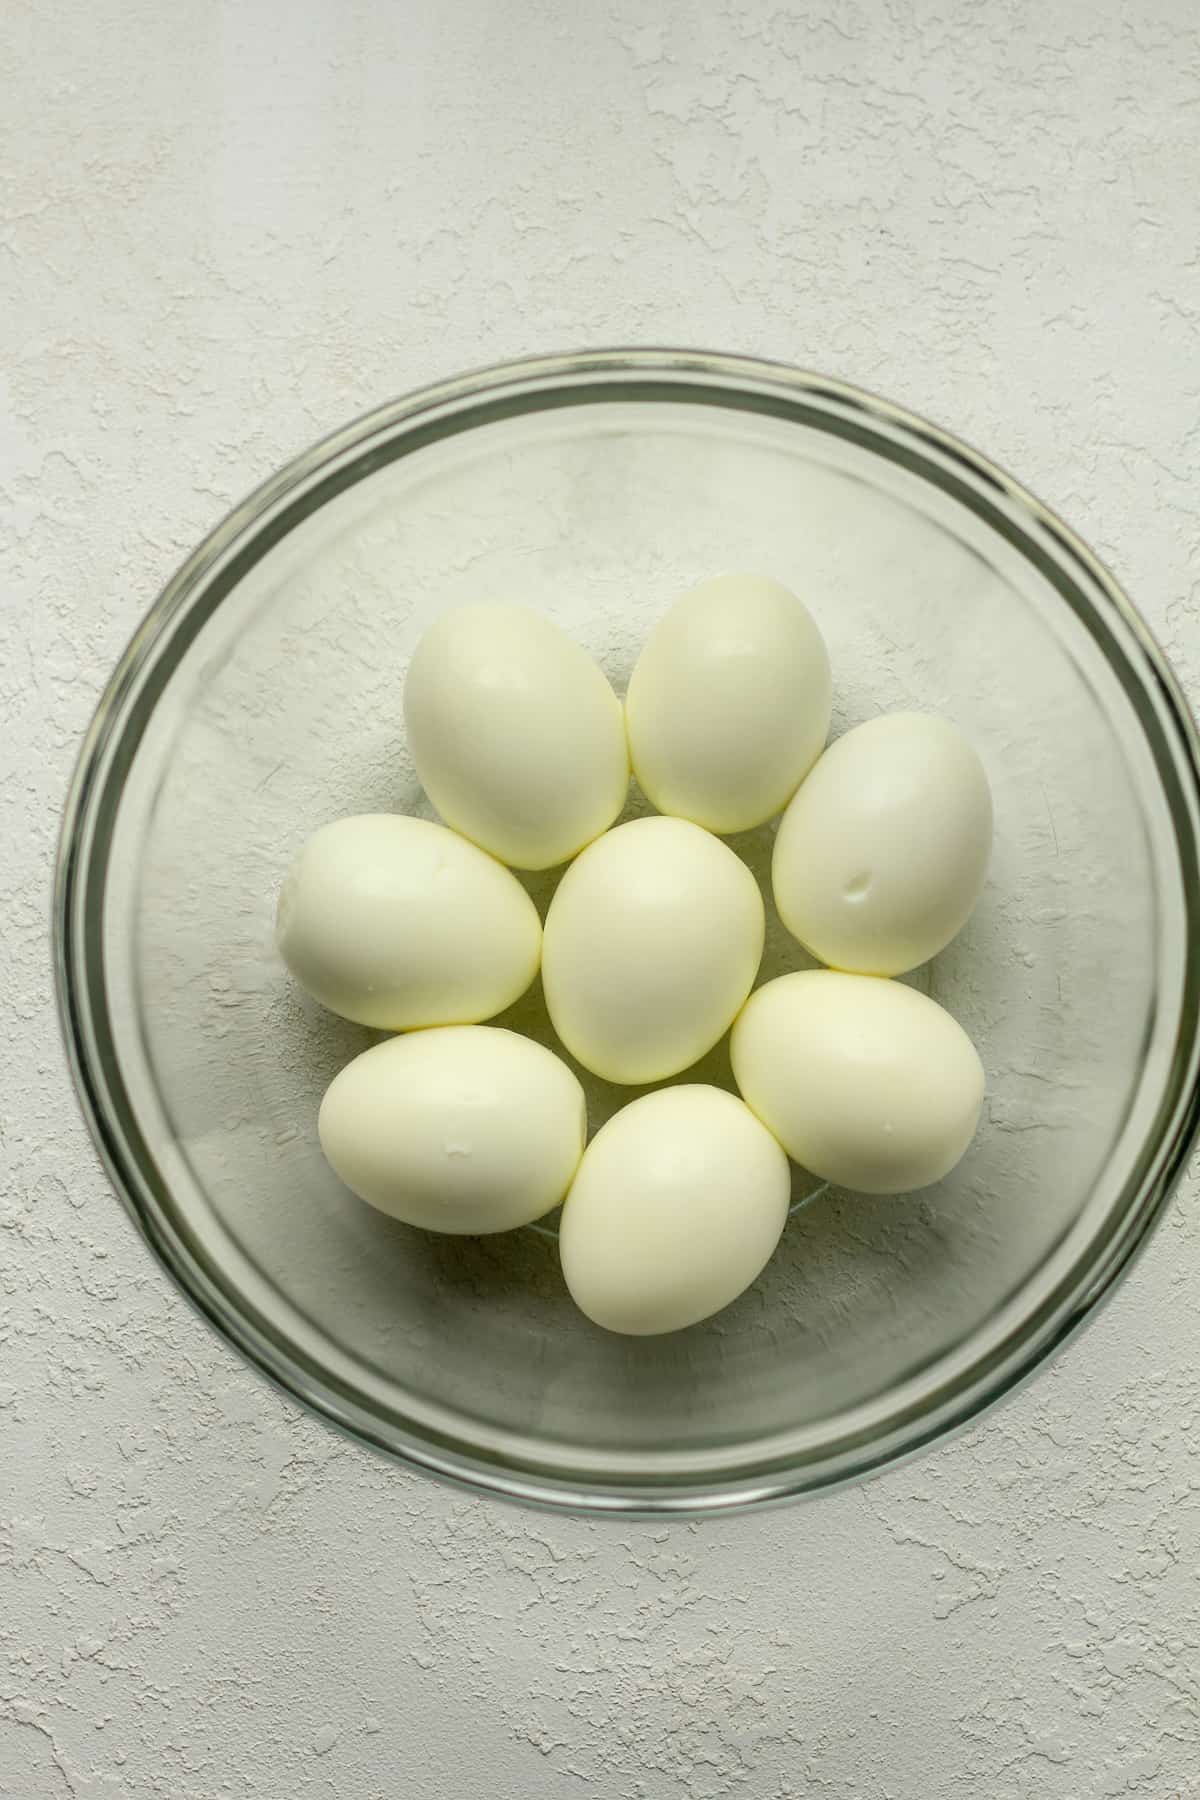 A bowl of the boiled eggs.